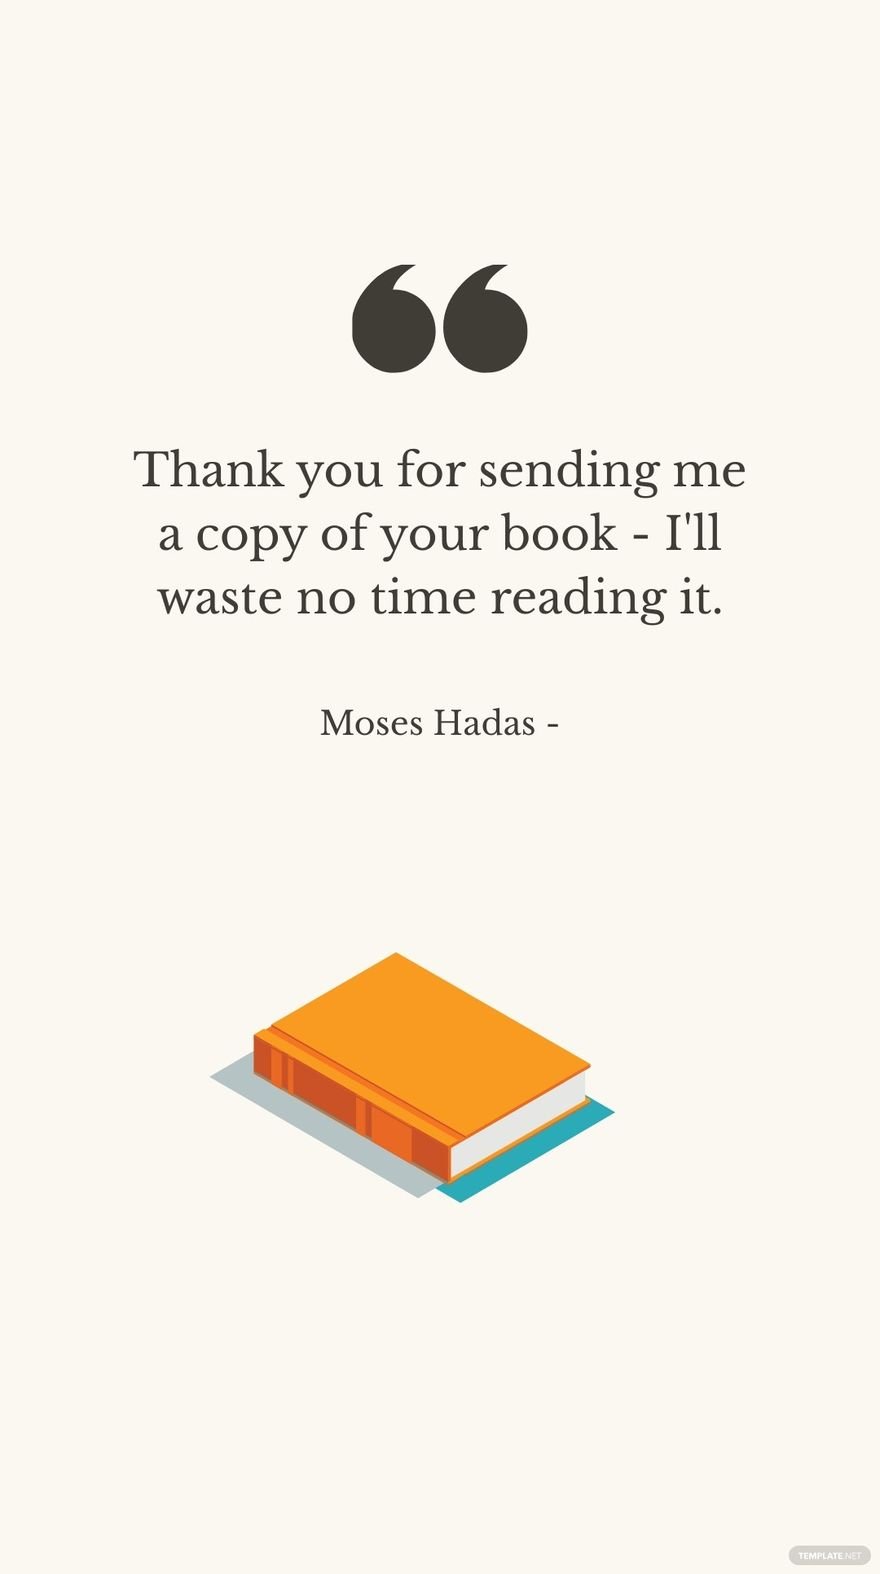 Free Moses Hadas - Thank you for sending me a copy of your book - I'll waste no time reading it. in JPG